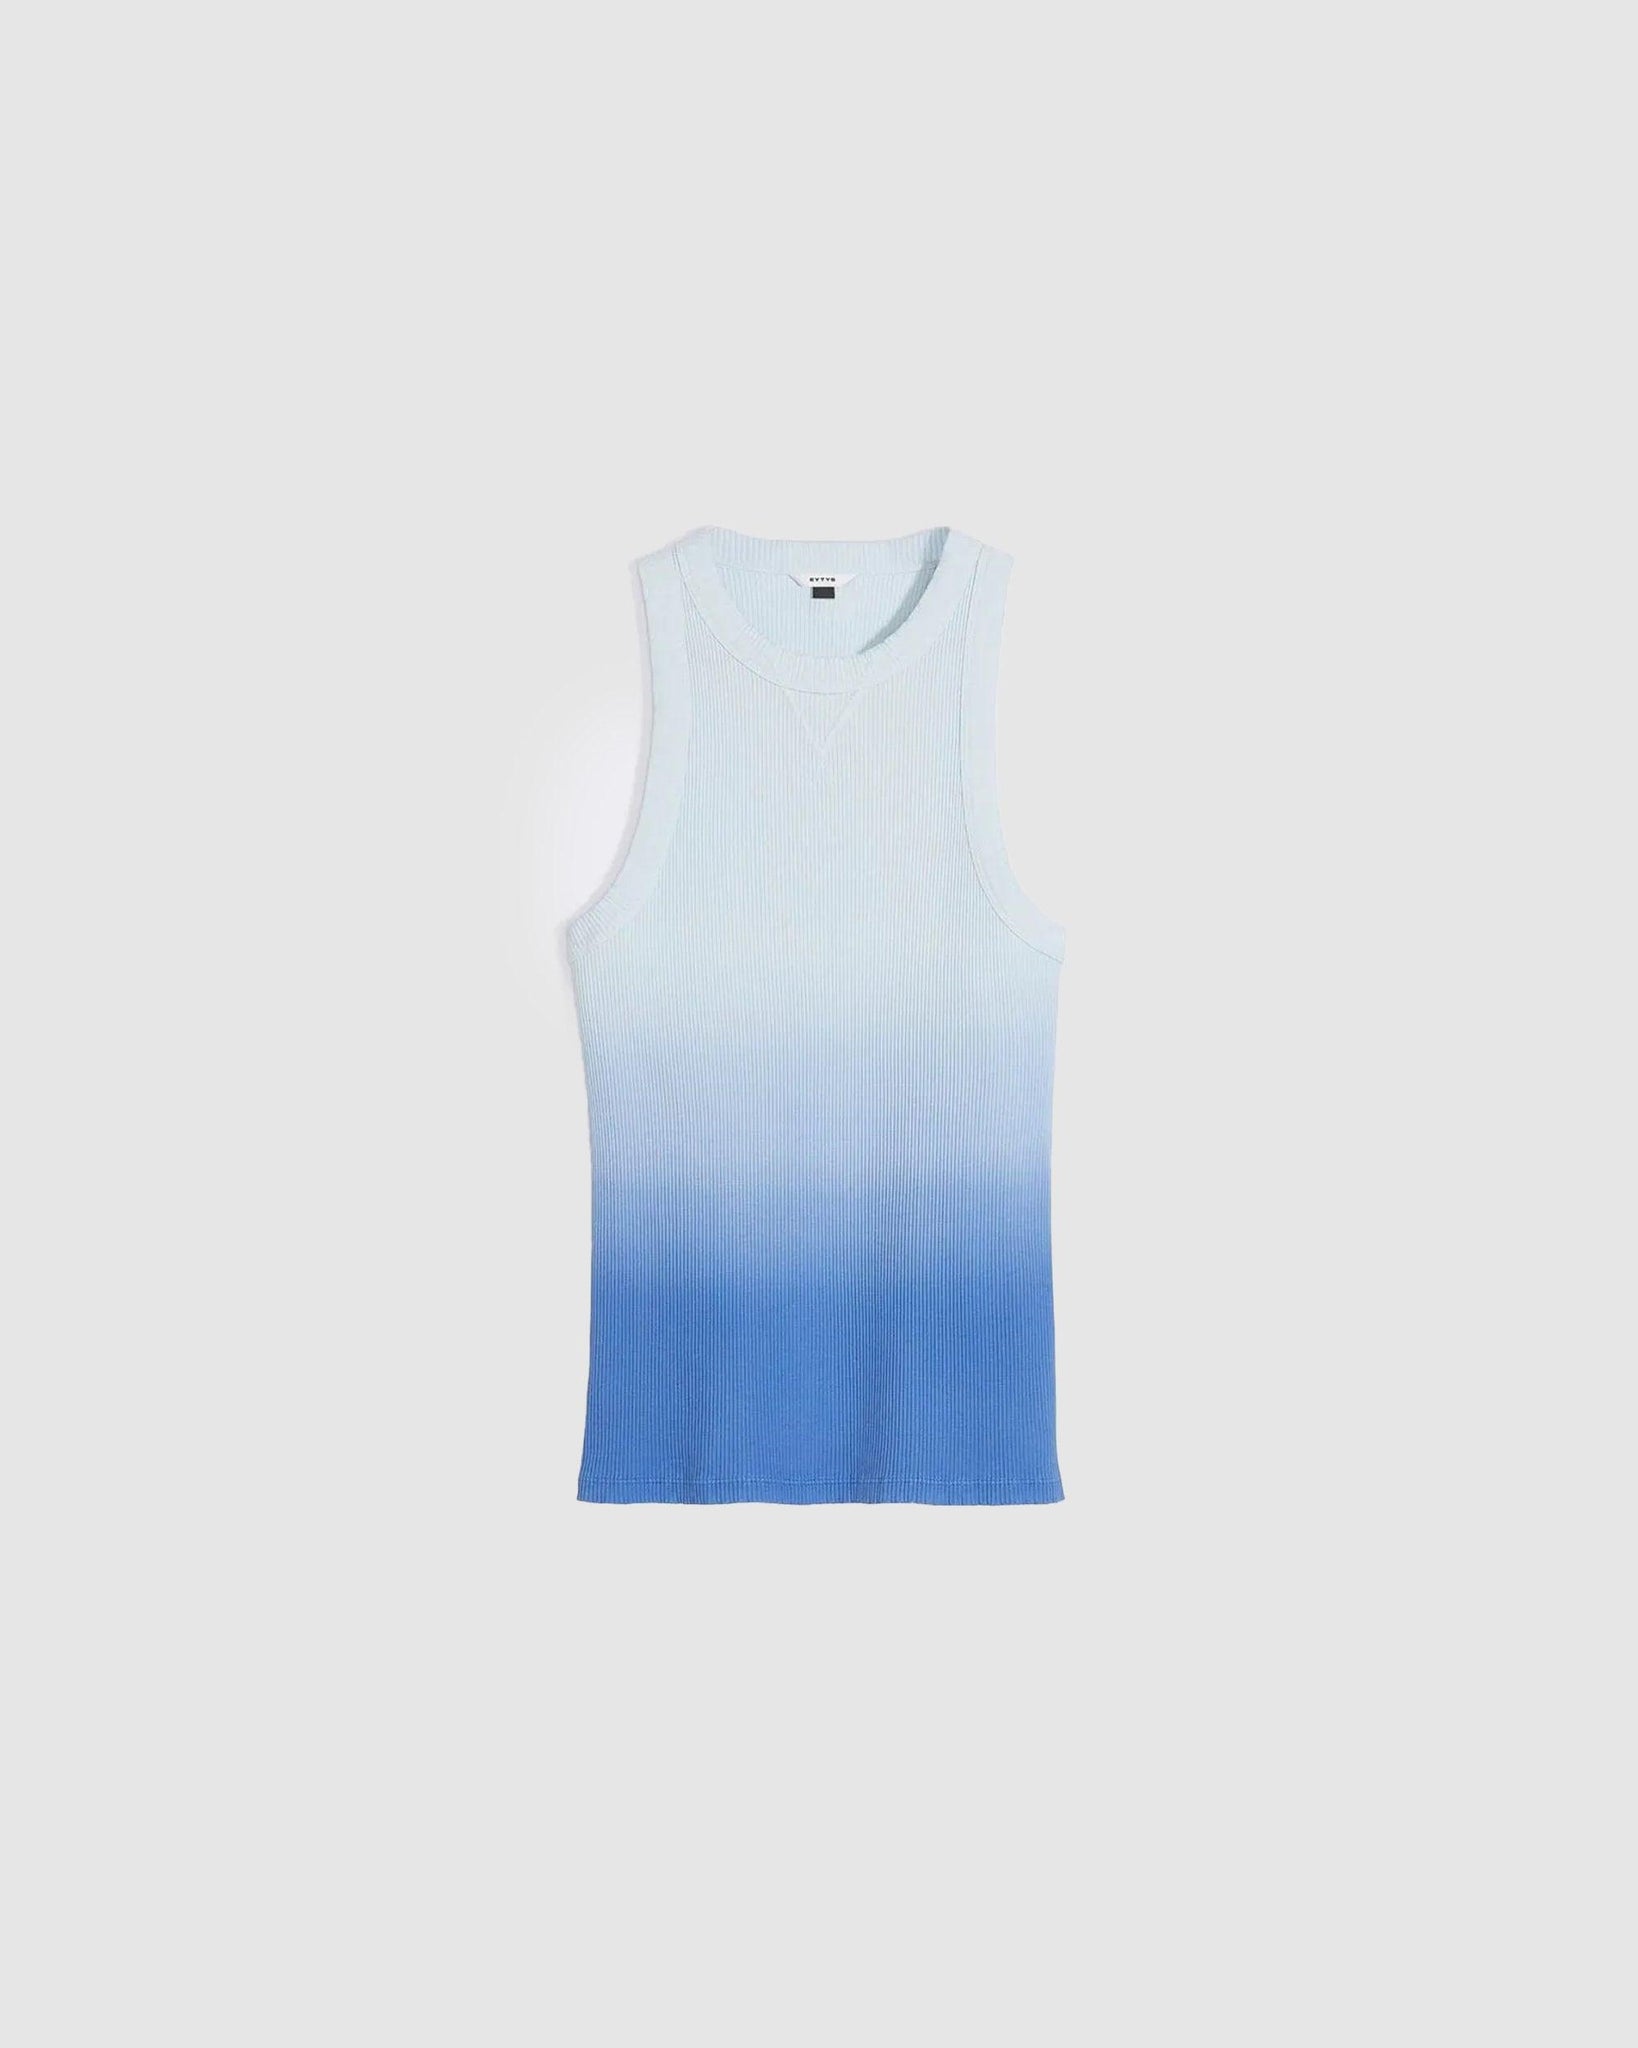 Ivy Blue Gradient Tank - {{ collection.title }} - Chinatown Country Club 